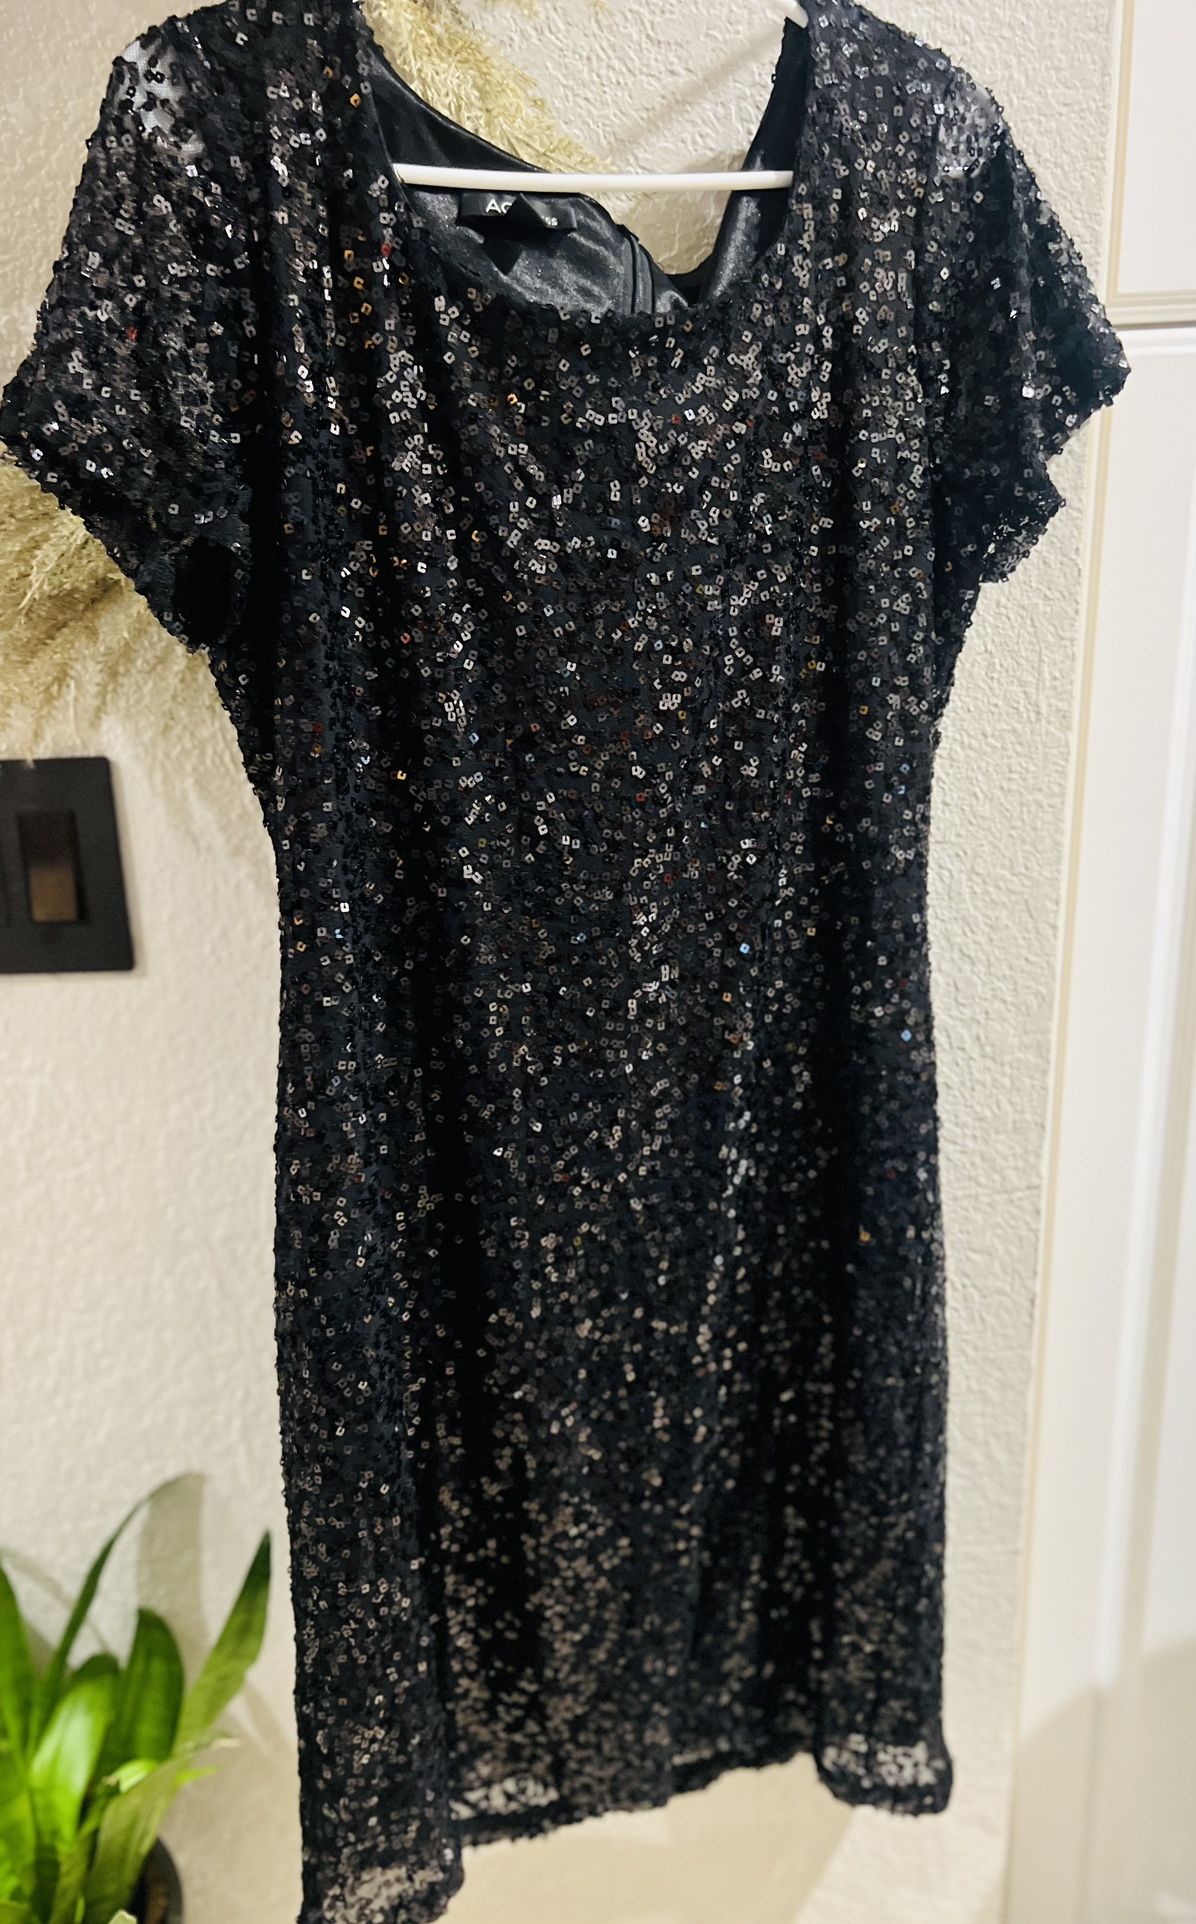 Women’s Sequin Dress Size 14 Very Nice Dress It’s Like New Condition 